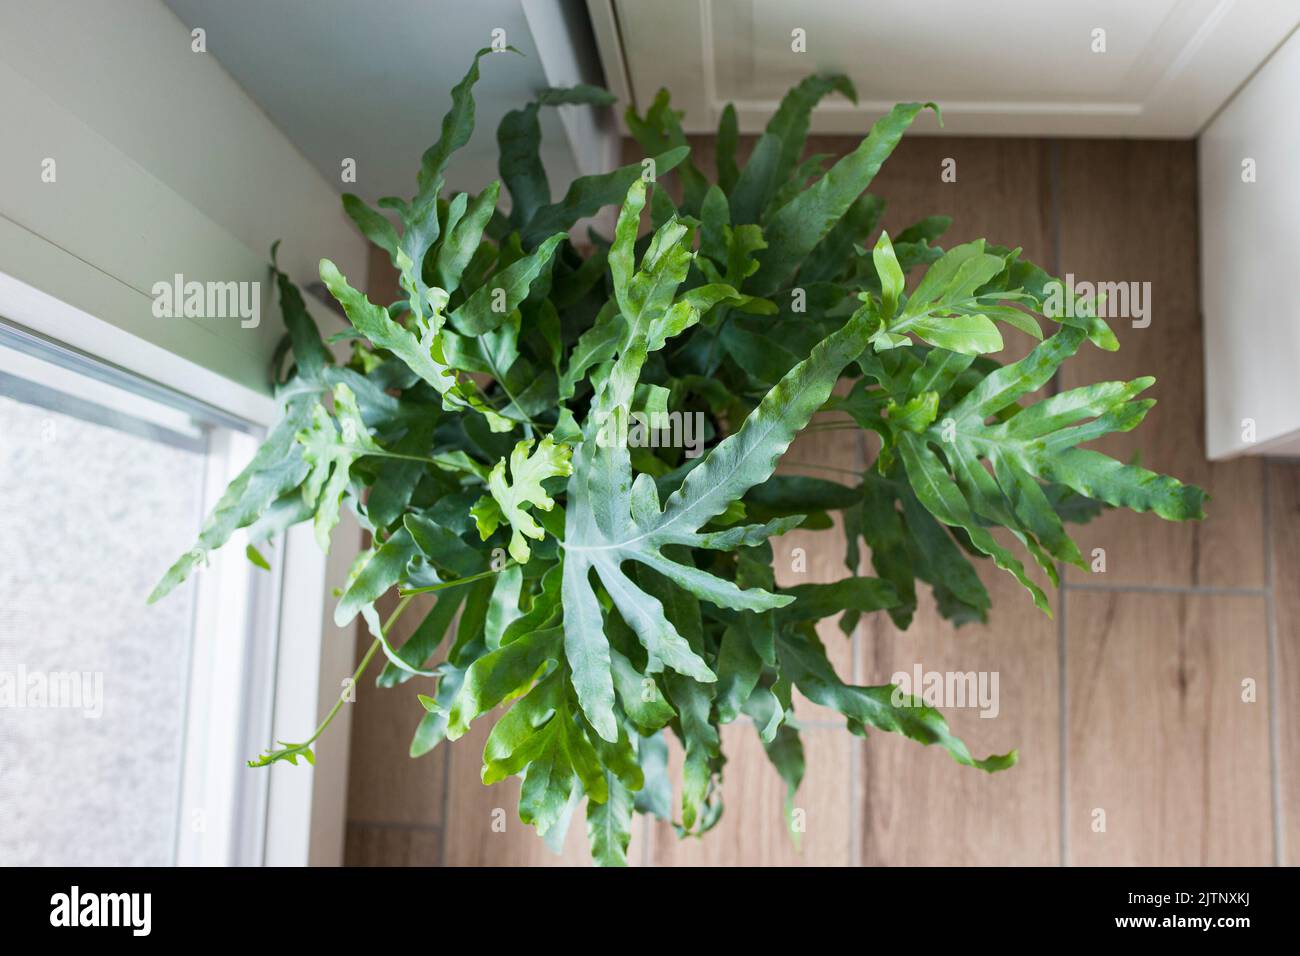 Top view of a plant of Blue Star fern (Phlebodium aureum), a fancy houseplant, on the floor in a house near a window. Stock Photo